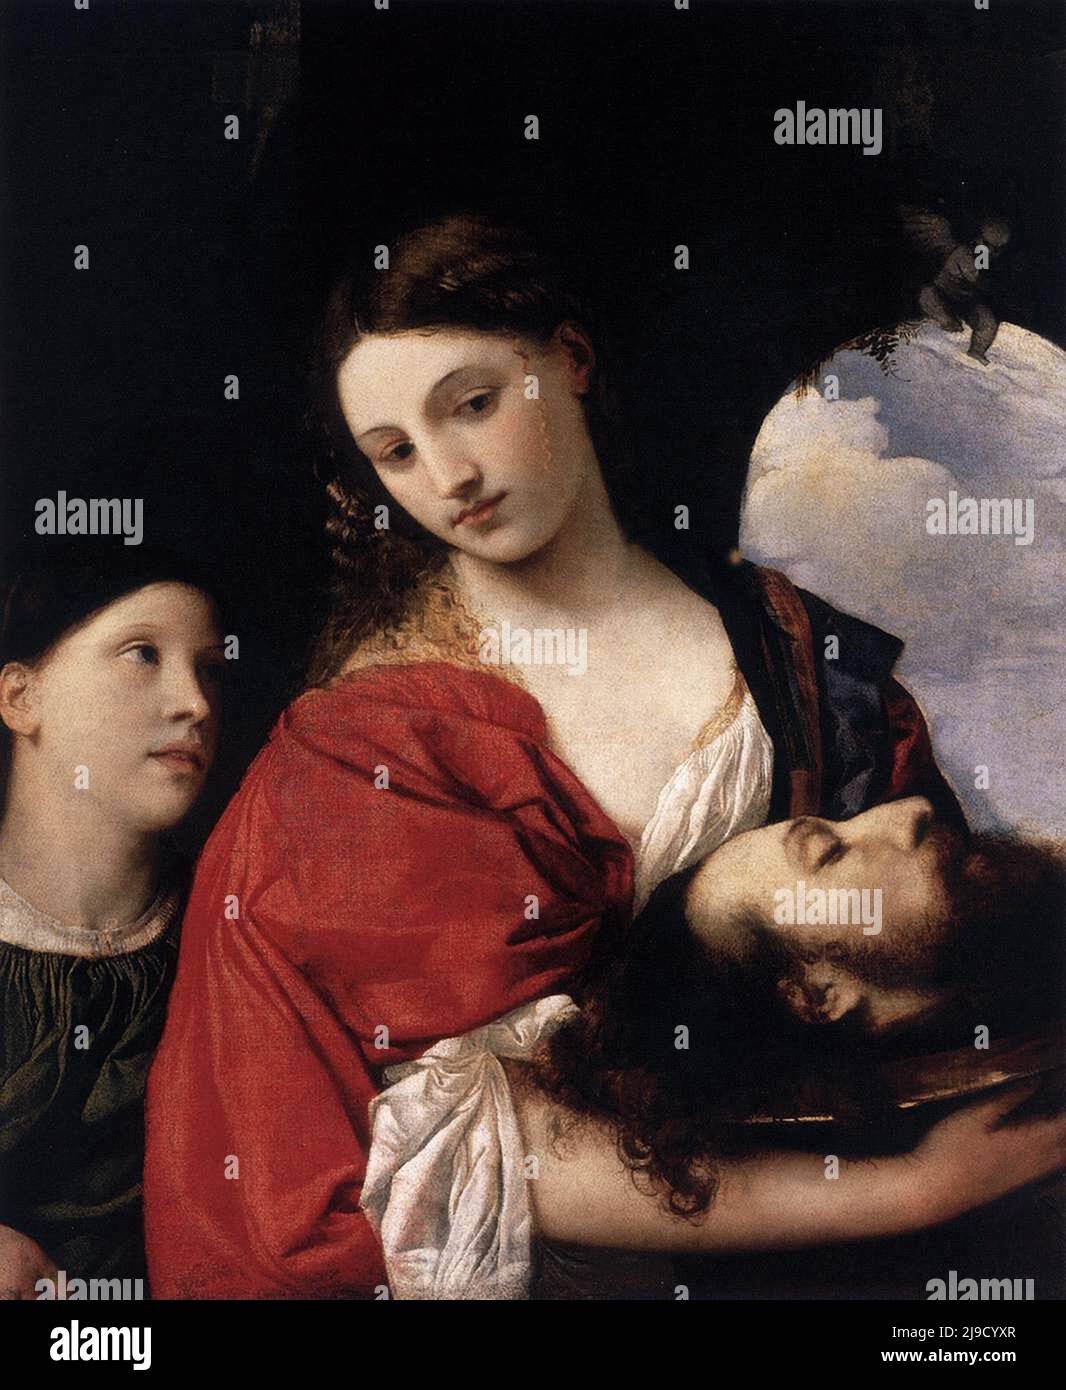 Titian - Web Gallery of Art:   Image  Info about artwork  Salome with the head of John the Baptist painted by Titian Stock Photo